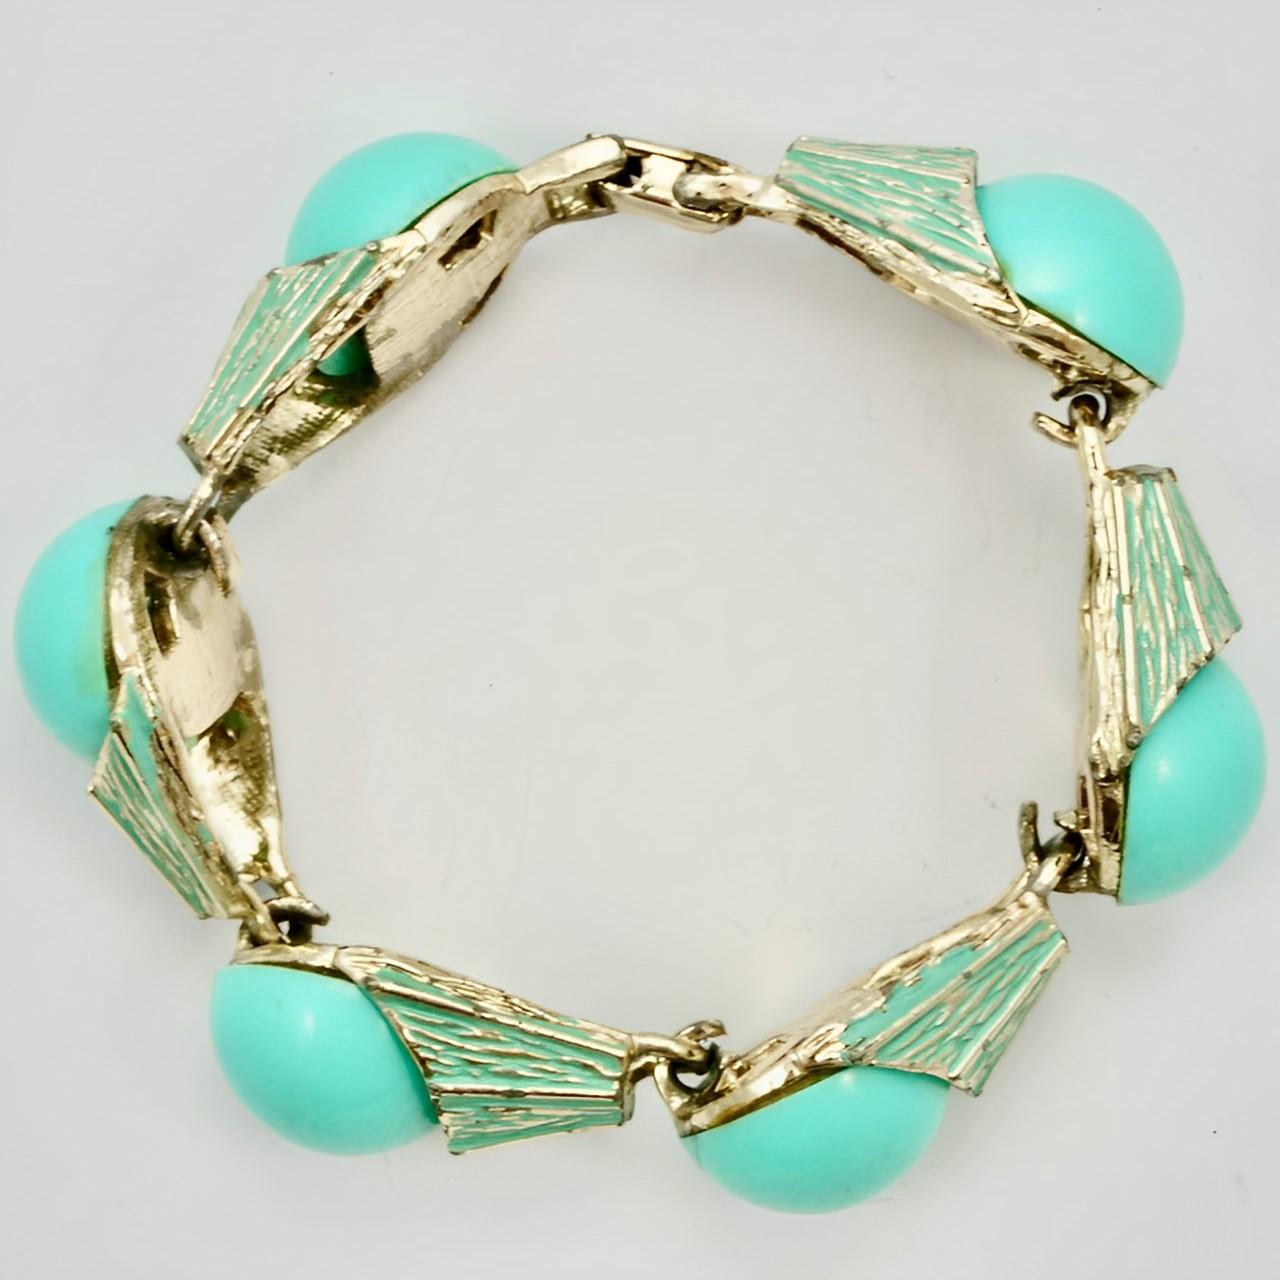 Pale Gold Tone Bracelet with Turquoise Enamel and Lucite Links circa 1960s For Sale 1